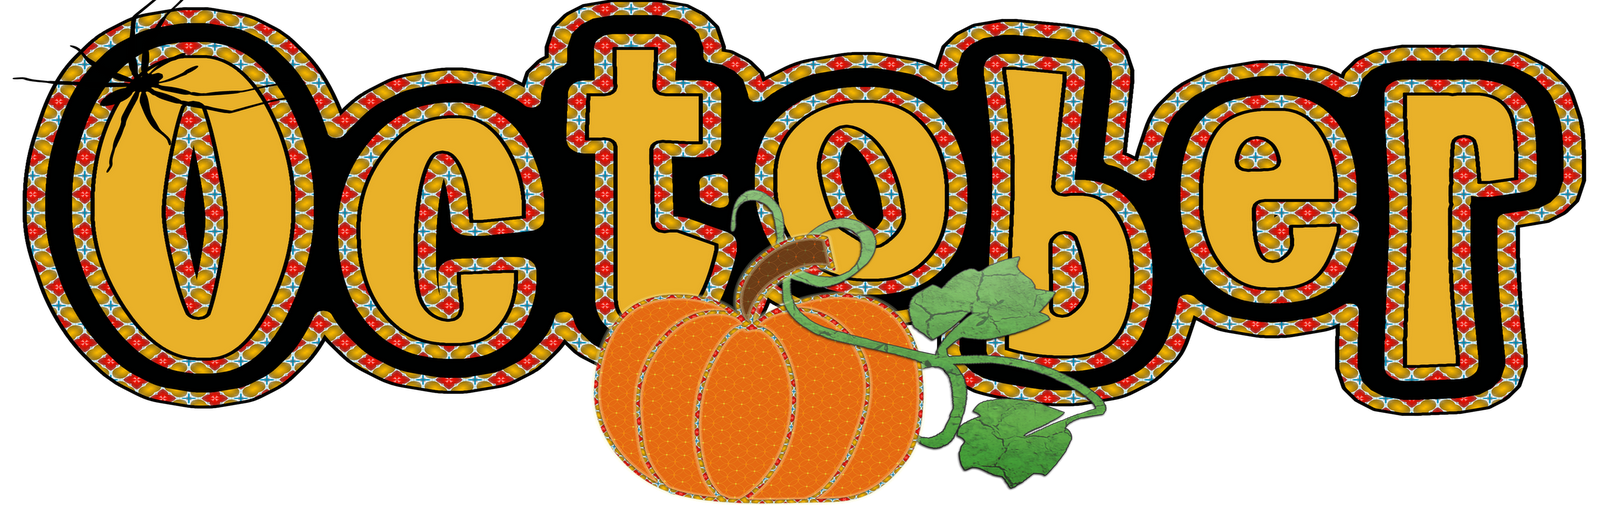 The am teacher let. Free clipart october